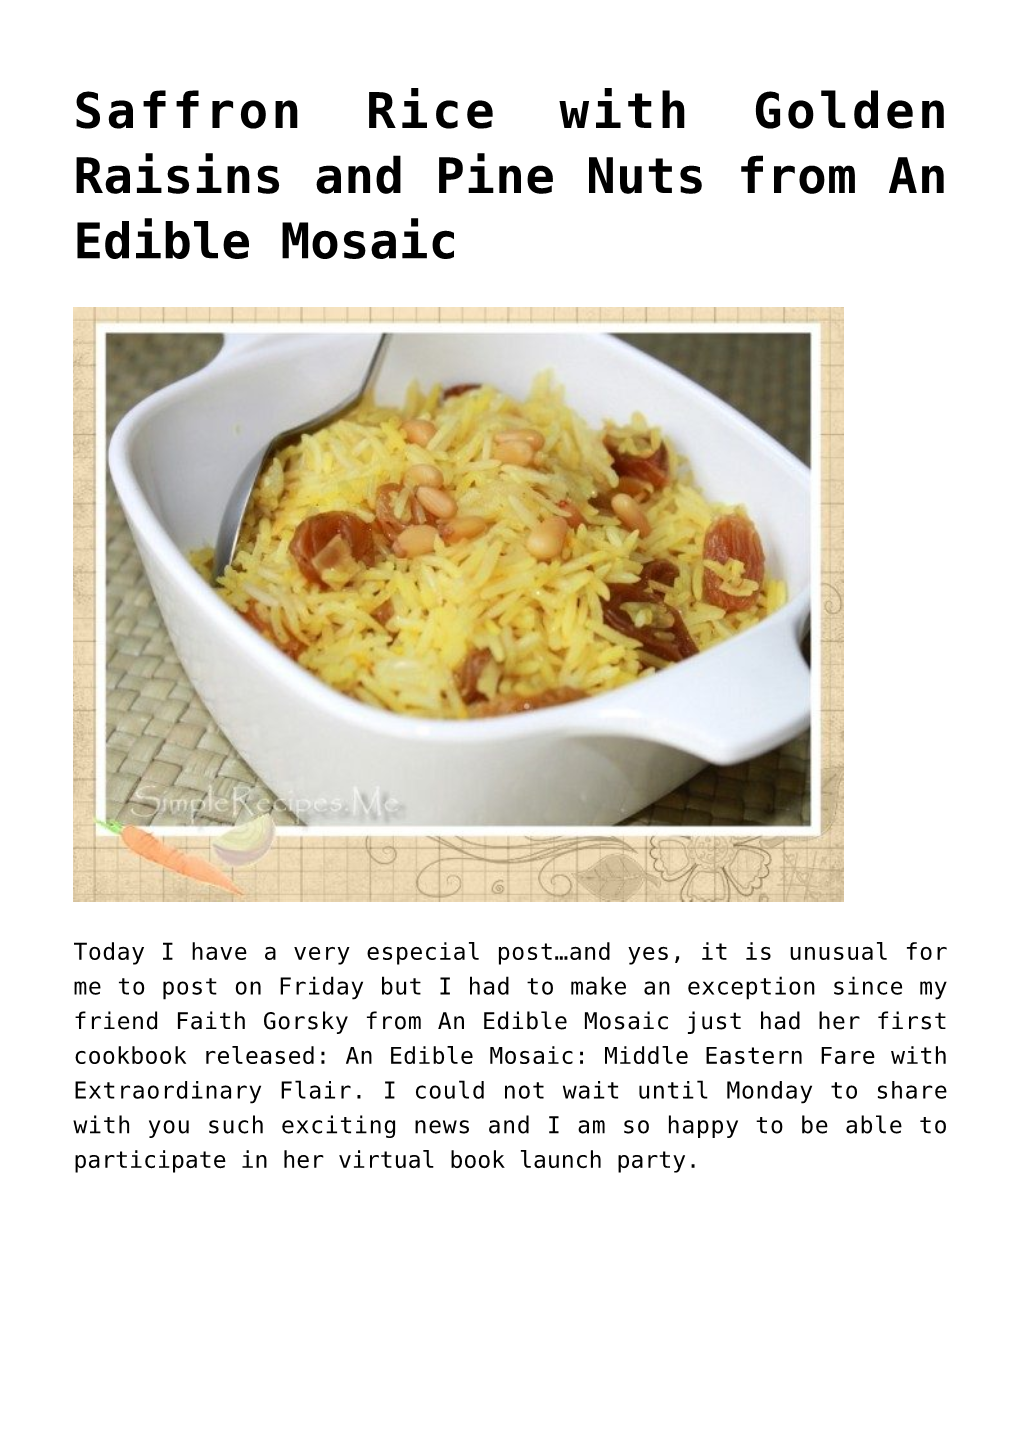 Saffron Rice with Golden Raisins and Pine Nuts from an Edible Mosaic